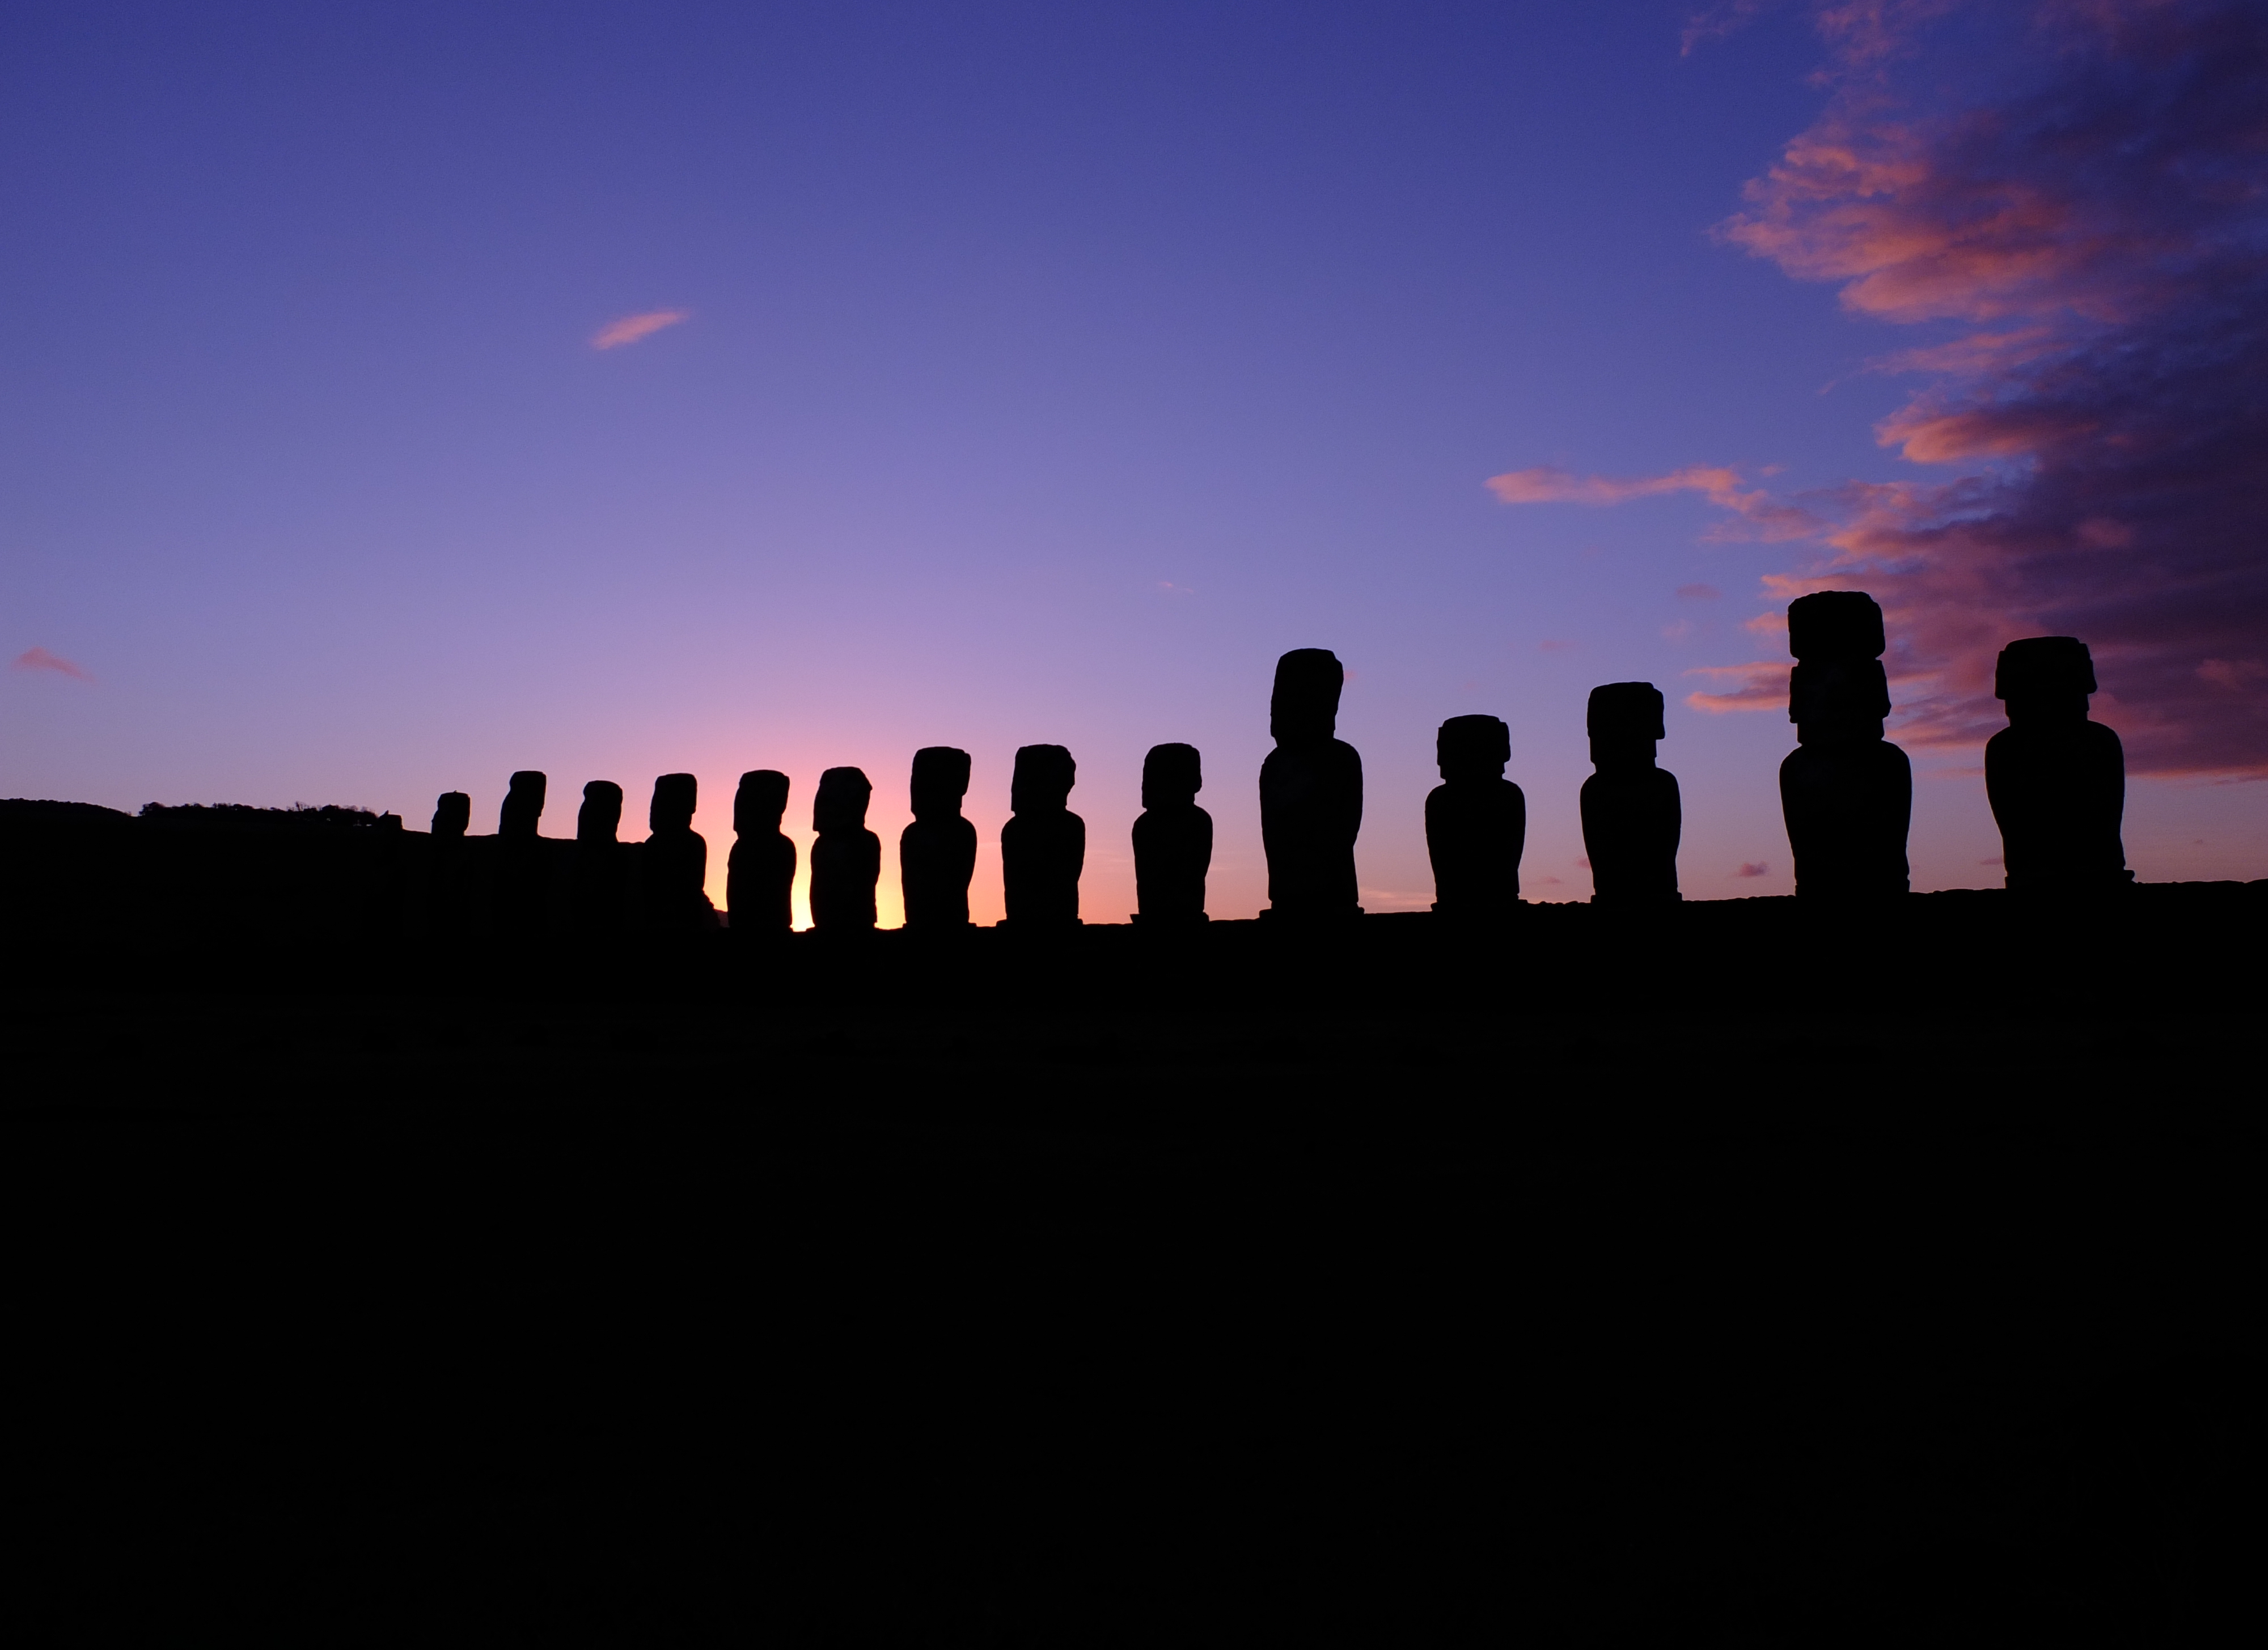 a row of statues in front of a sunset